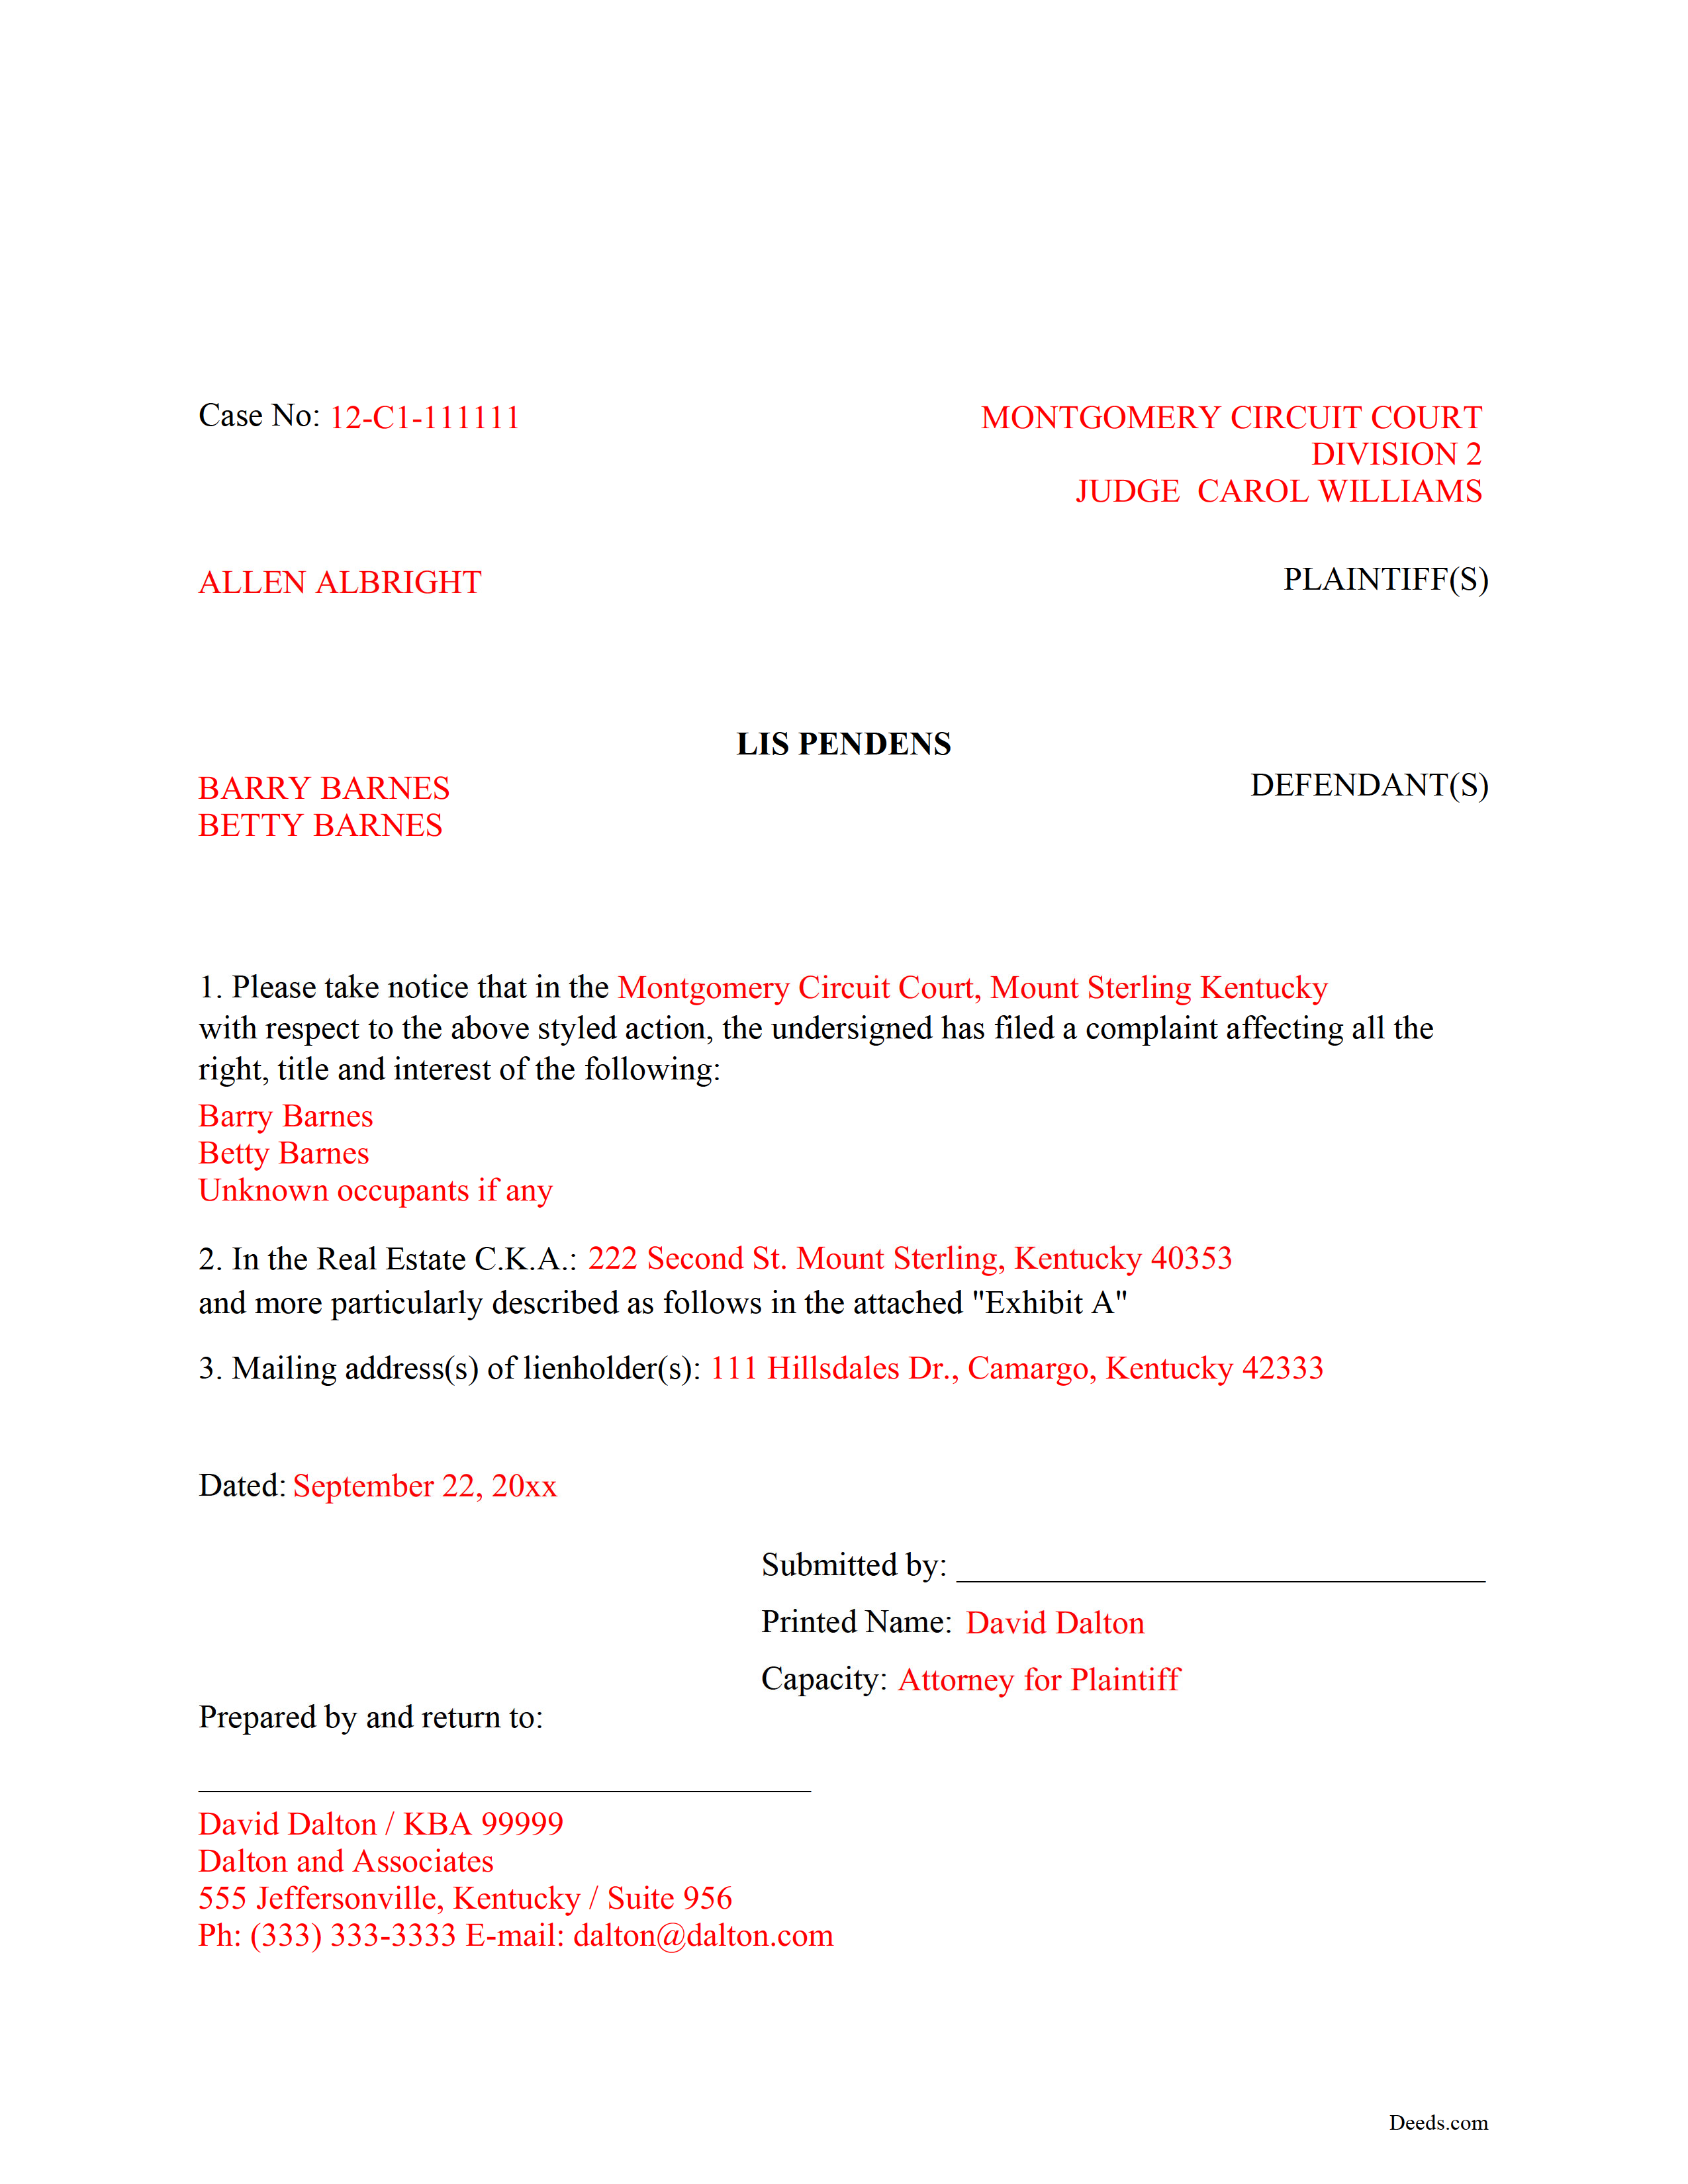 Completed Example of the Lis Pendens Document